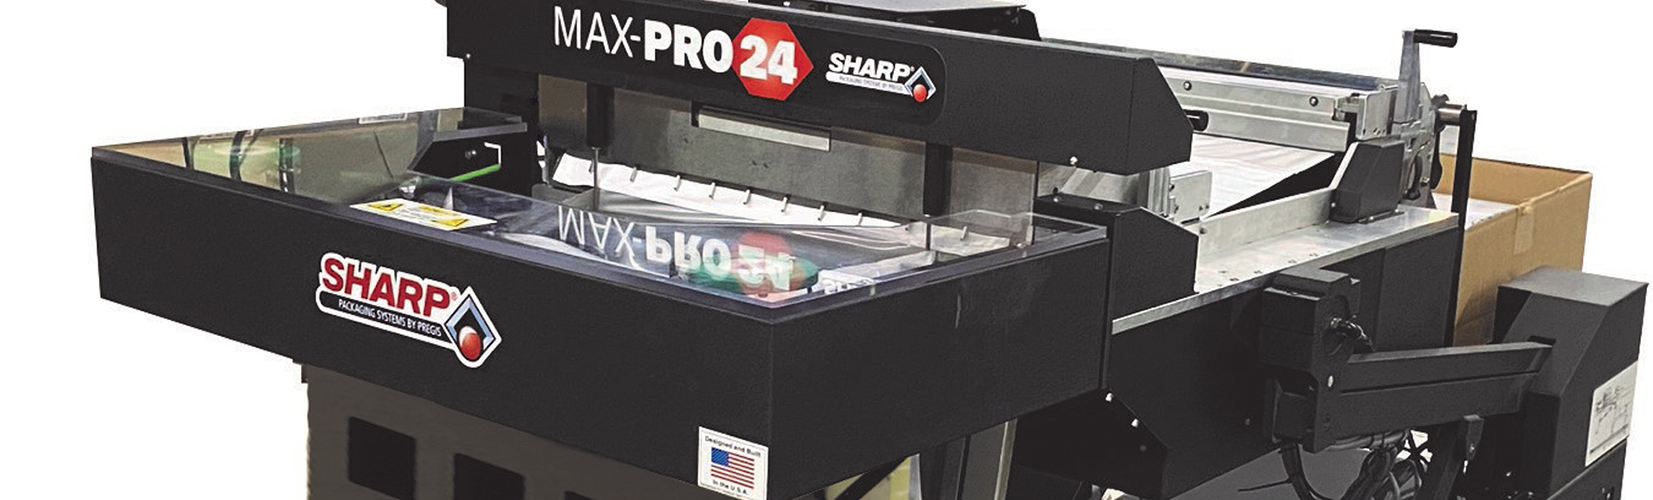 MAX-PRO 24 poly bagging system